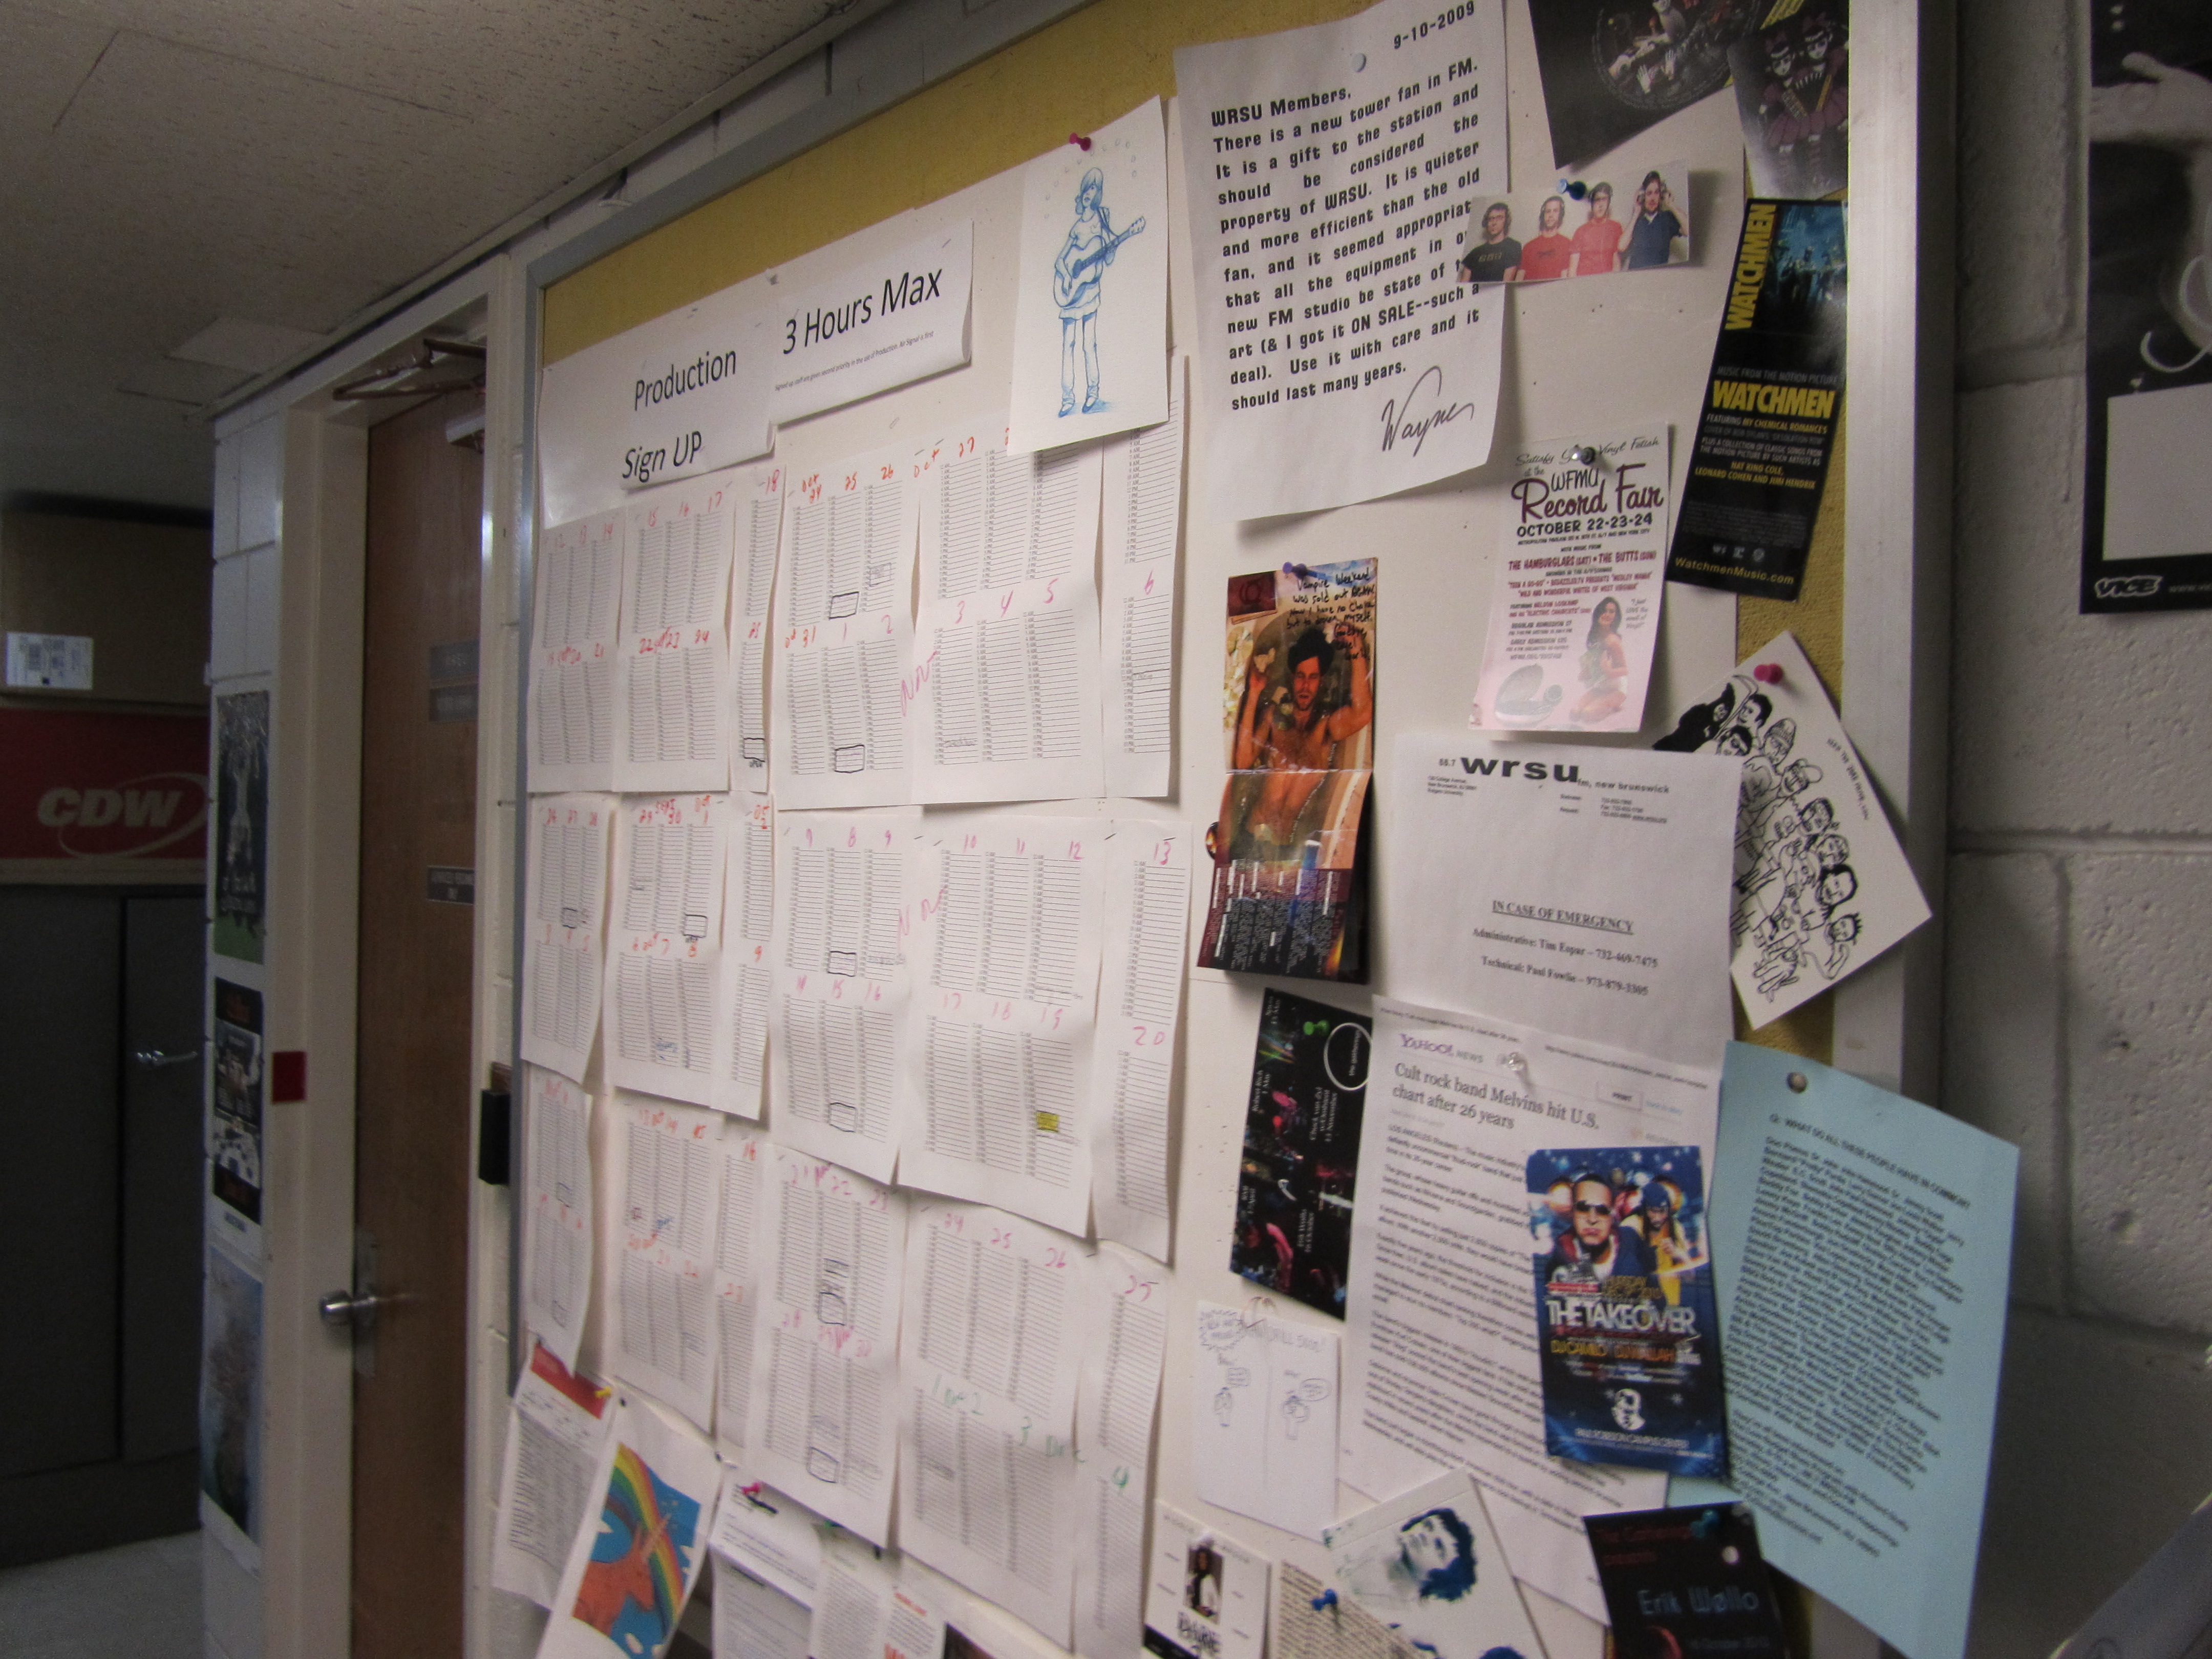 2010 The Bulletin Board in the Hallway - Produciton Schedule and radom postings.